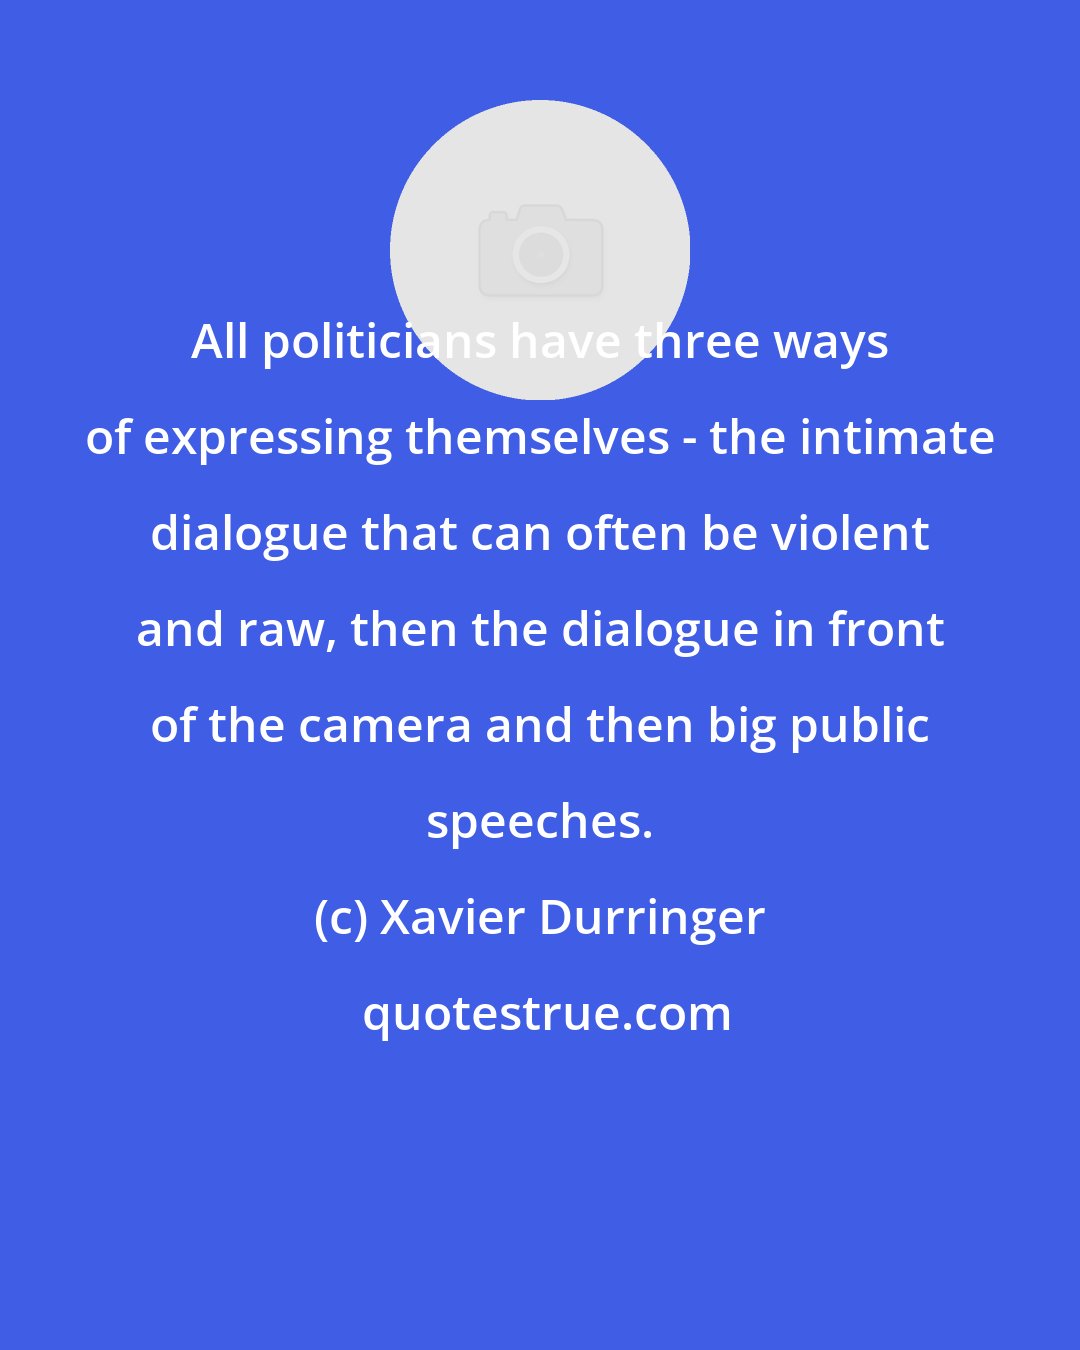 Xavier Durringer: All politicians have three ways of expressing themselves - the intimate dialogue that can often be violent and raw, then the dialogue in front of the camera and then big public speeches.